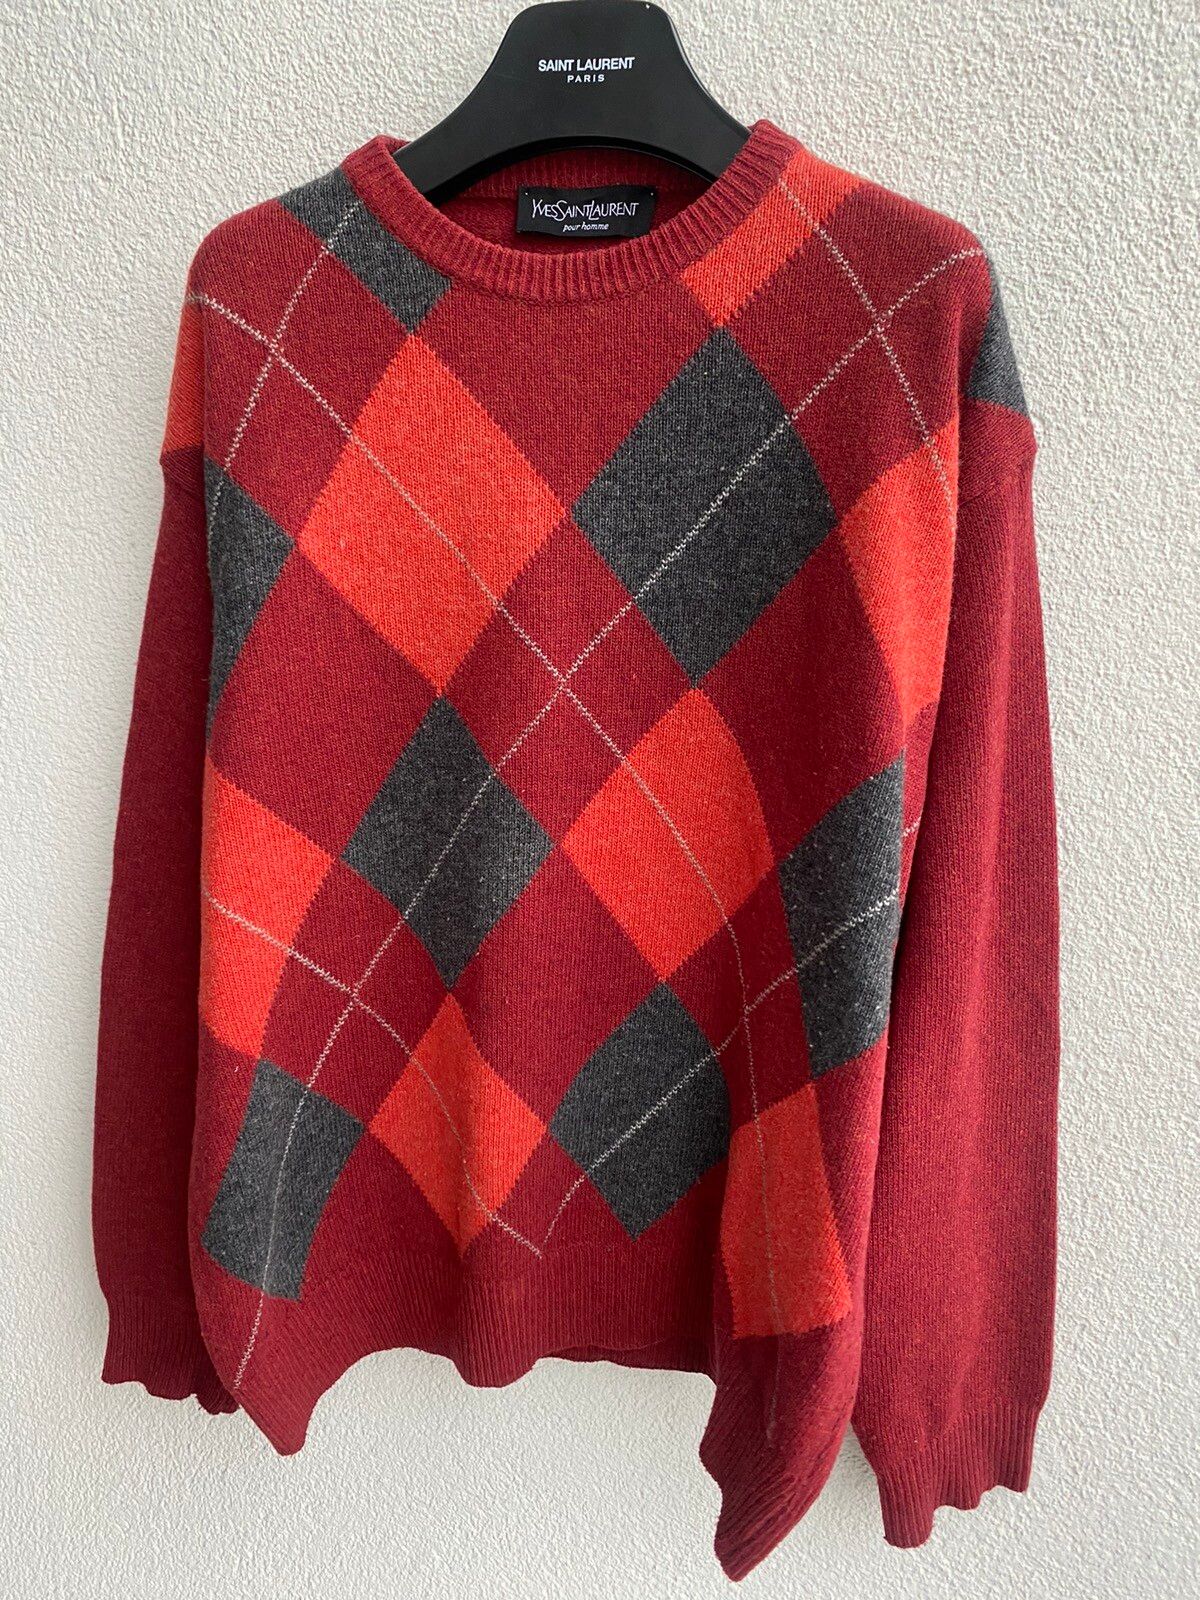 Vintage 🇮🇹italy 90’s YSL Sweater Wool Knit Soft Size US L / EU 52-54 / 3 - 11 Preview